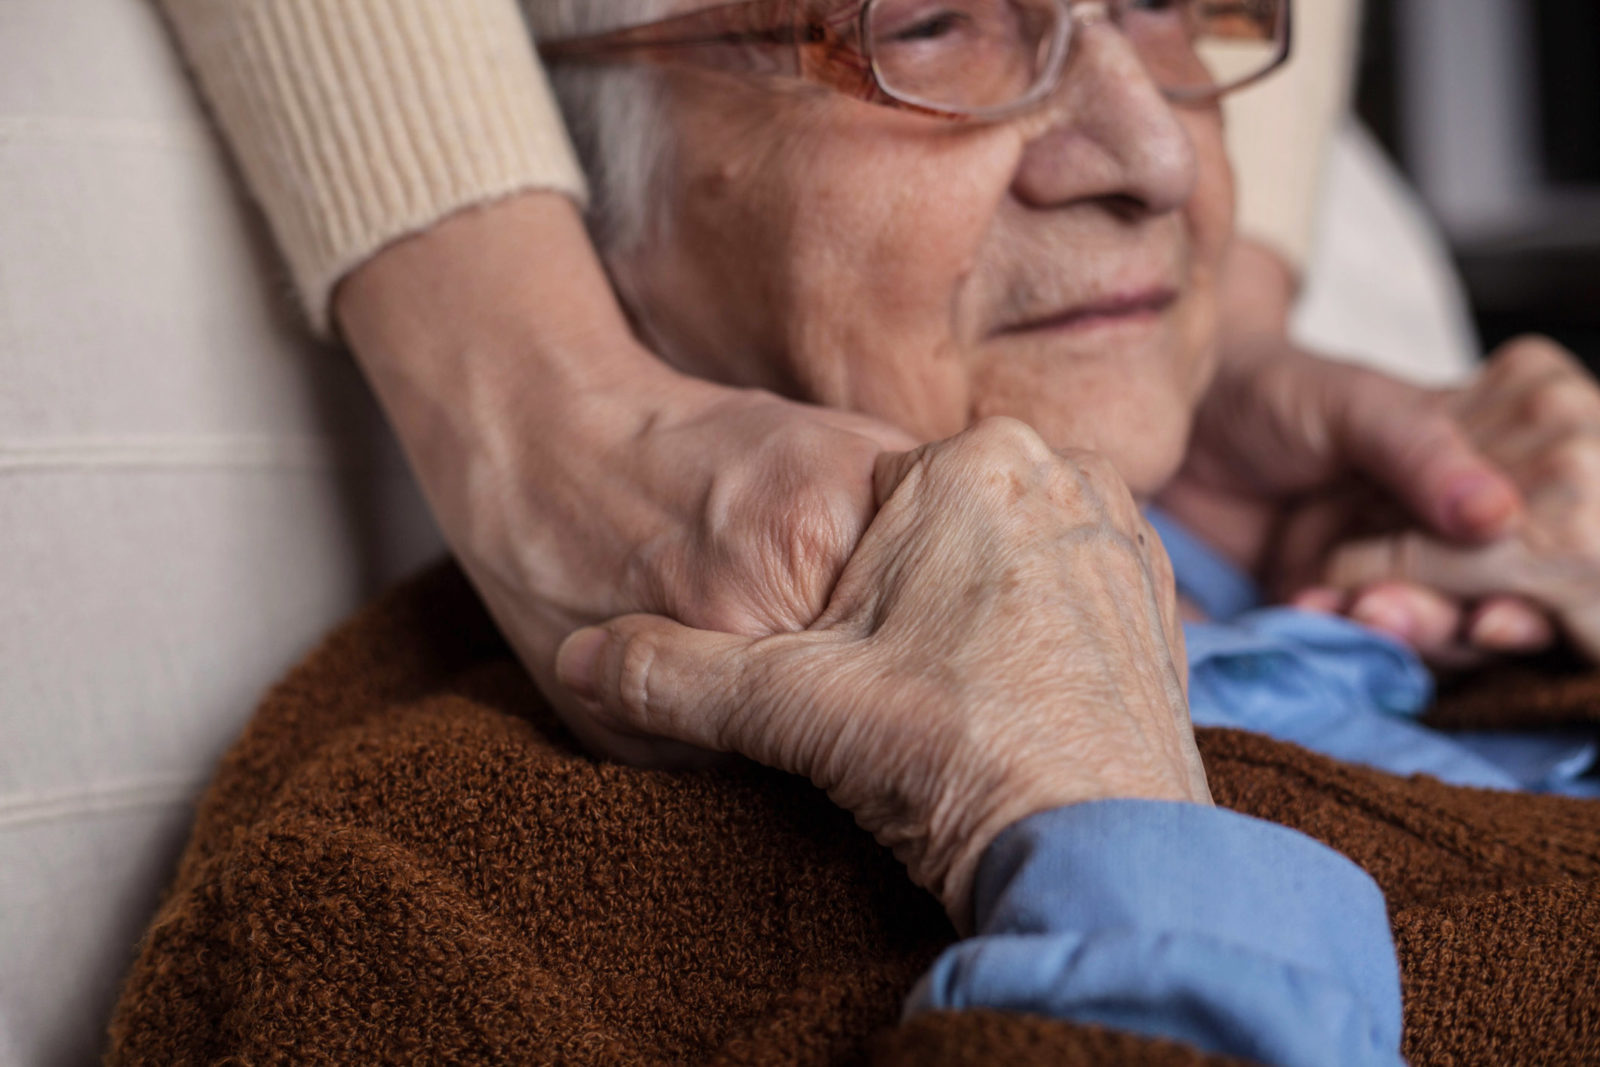 Older person with a loved one's hands on shoulders